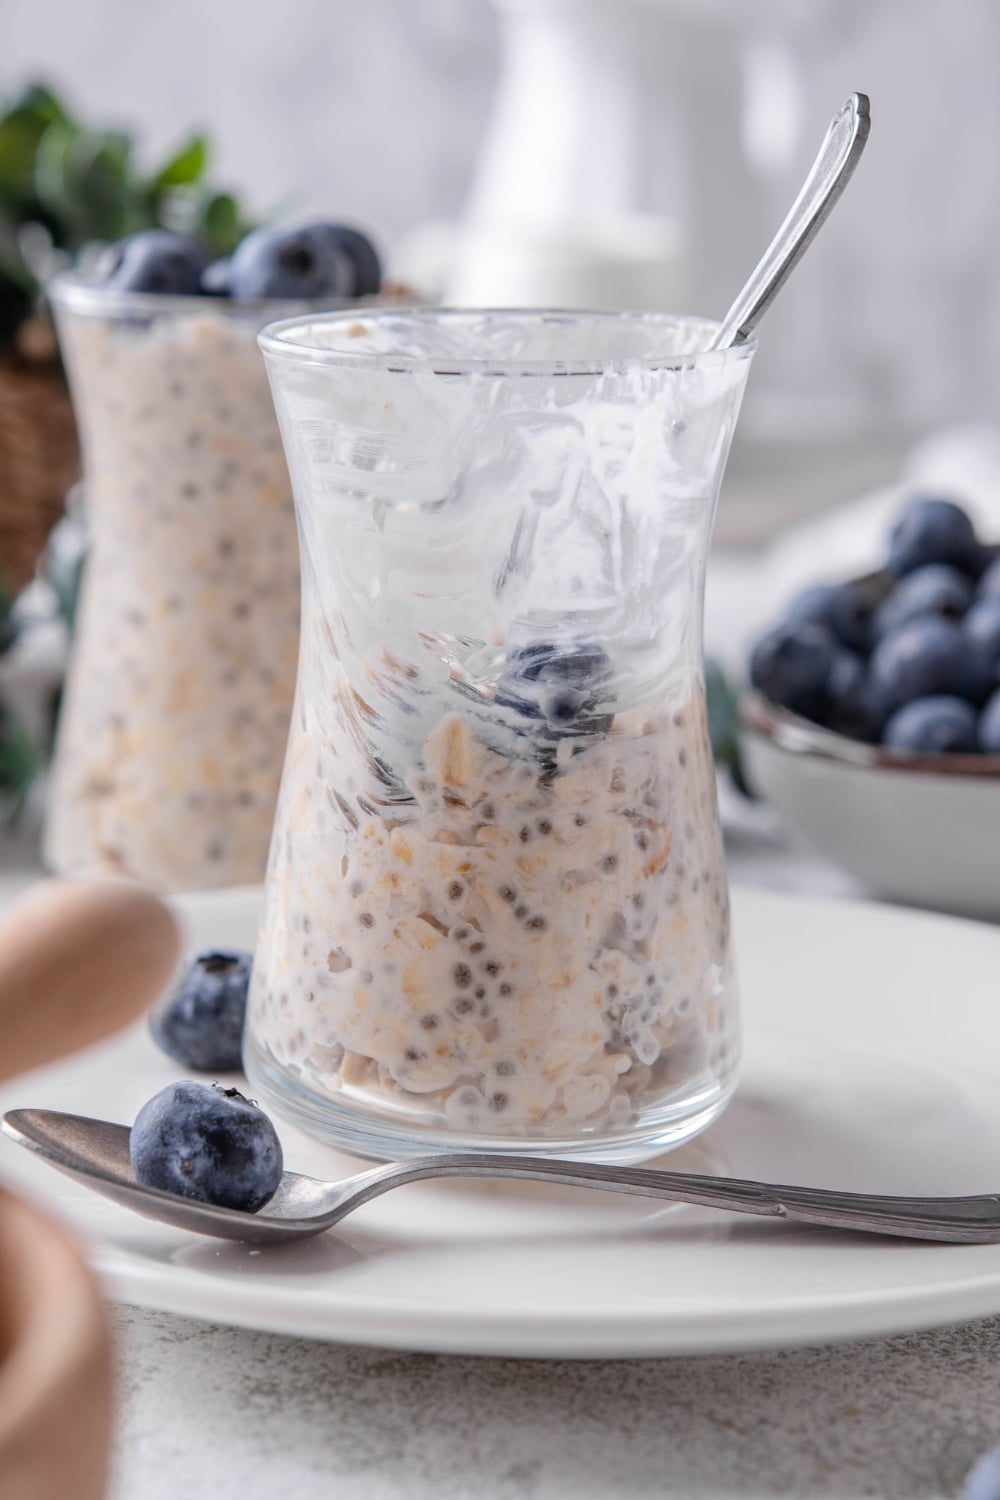 A half- eaten glass jar filled with overnight oats and topped with fresh blueberries. The jar is on top of a ceramic plate with blueberries scattered around it, and a spoon in front.